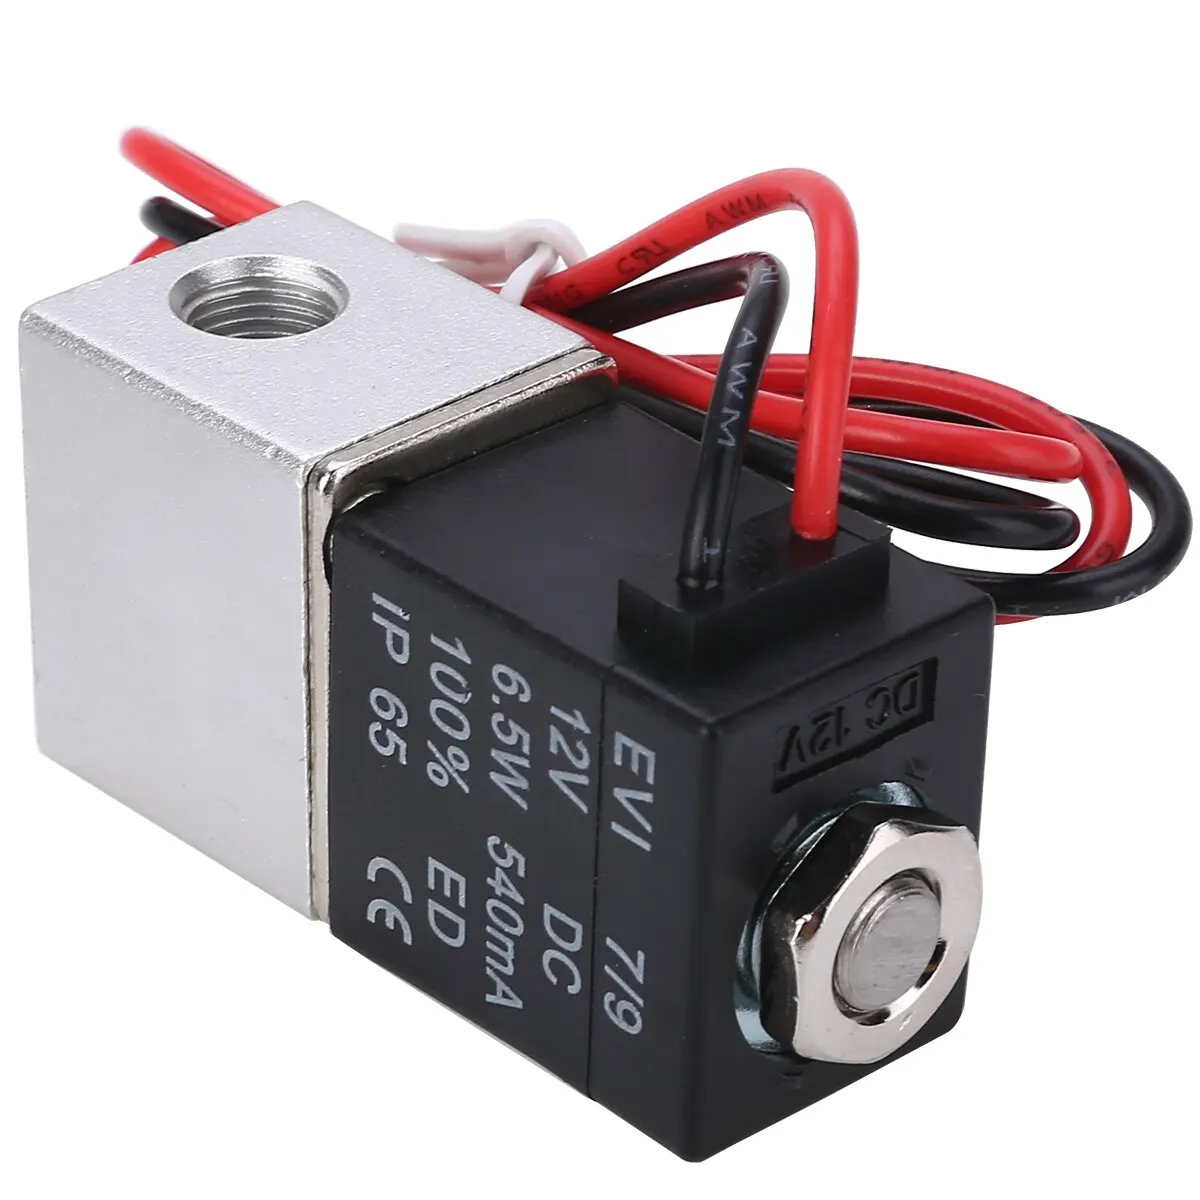 Mayitr Solenoid Valve DC 12V 1/8" Electric Solenoid Valve Stainless Steel Solenoid Valve for Water Air